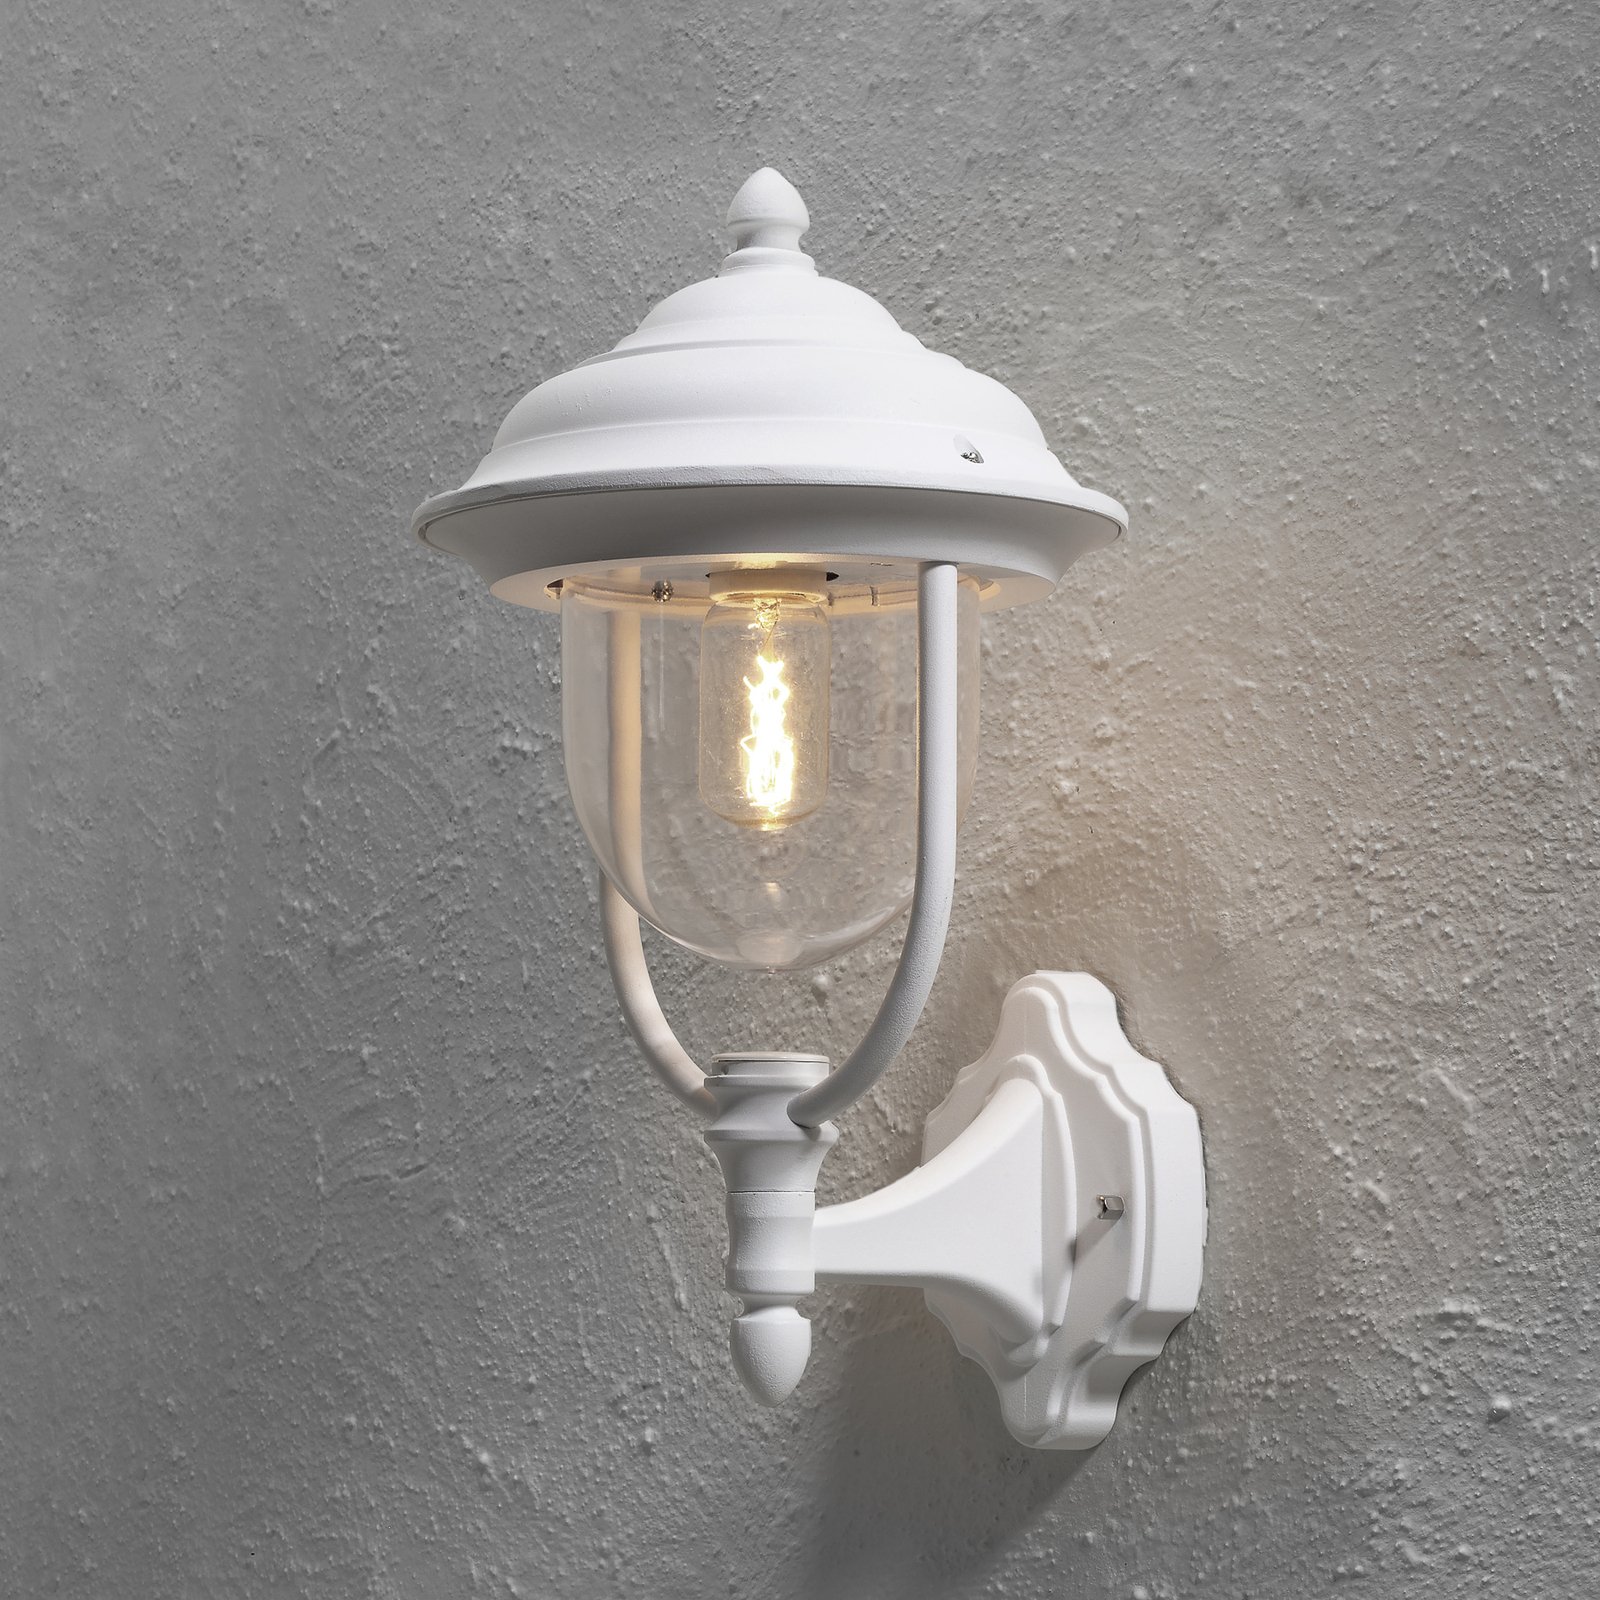 Parma outdoor wall light, standing lantern, white